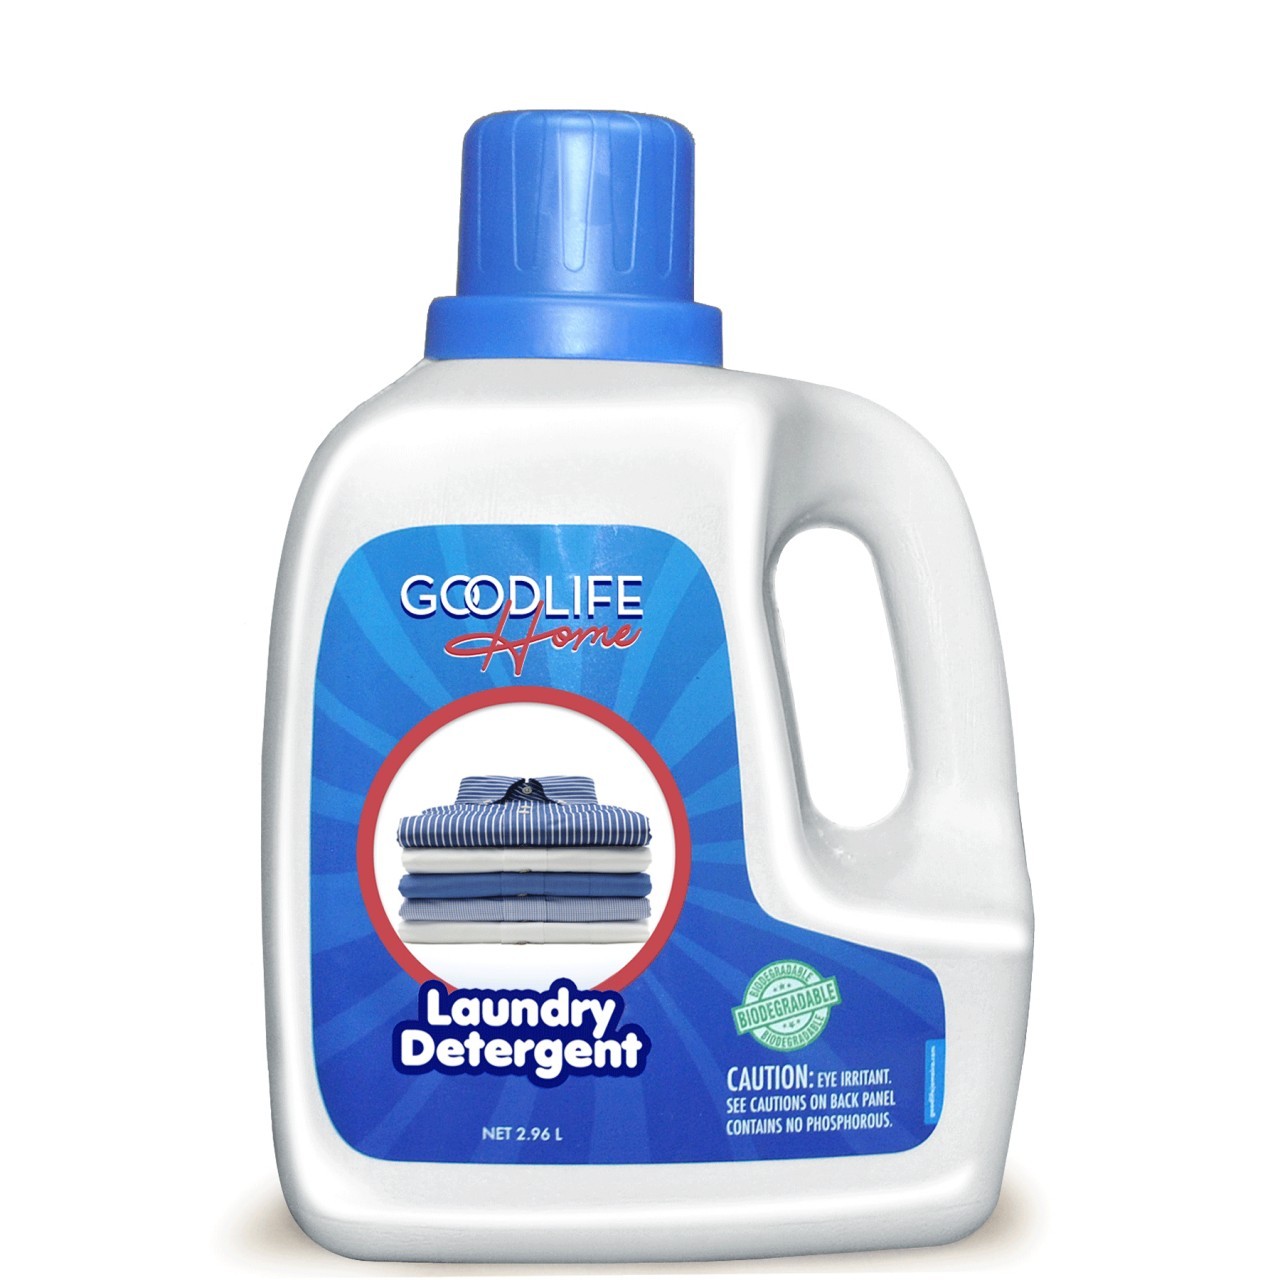 GOODLIFE HOME LAUNDRY DETERGENT 2.96L